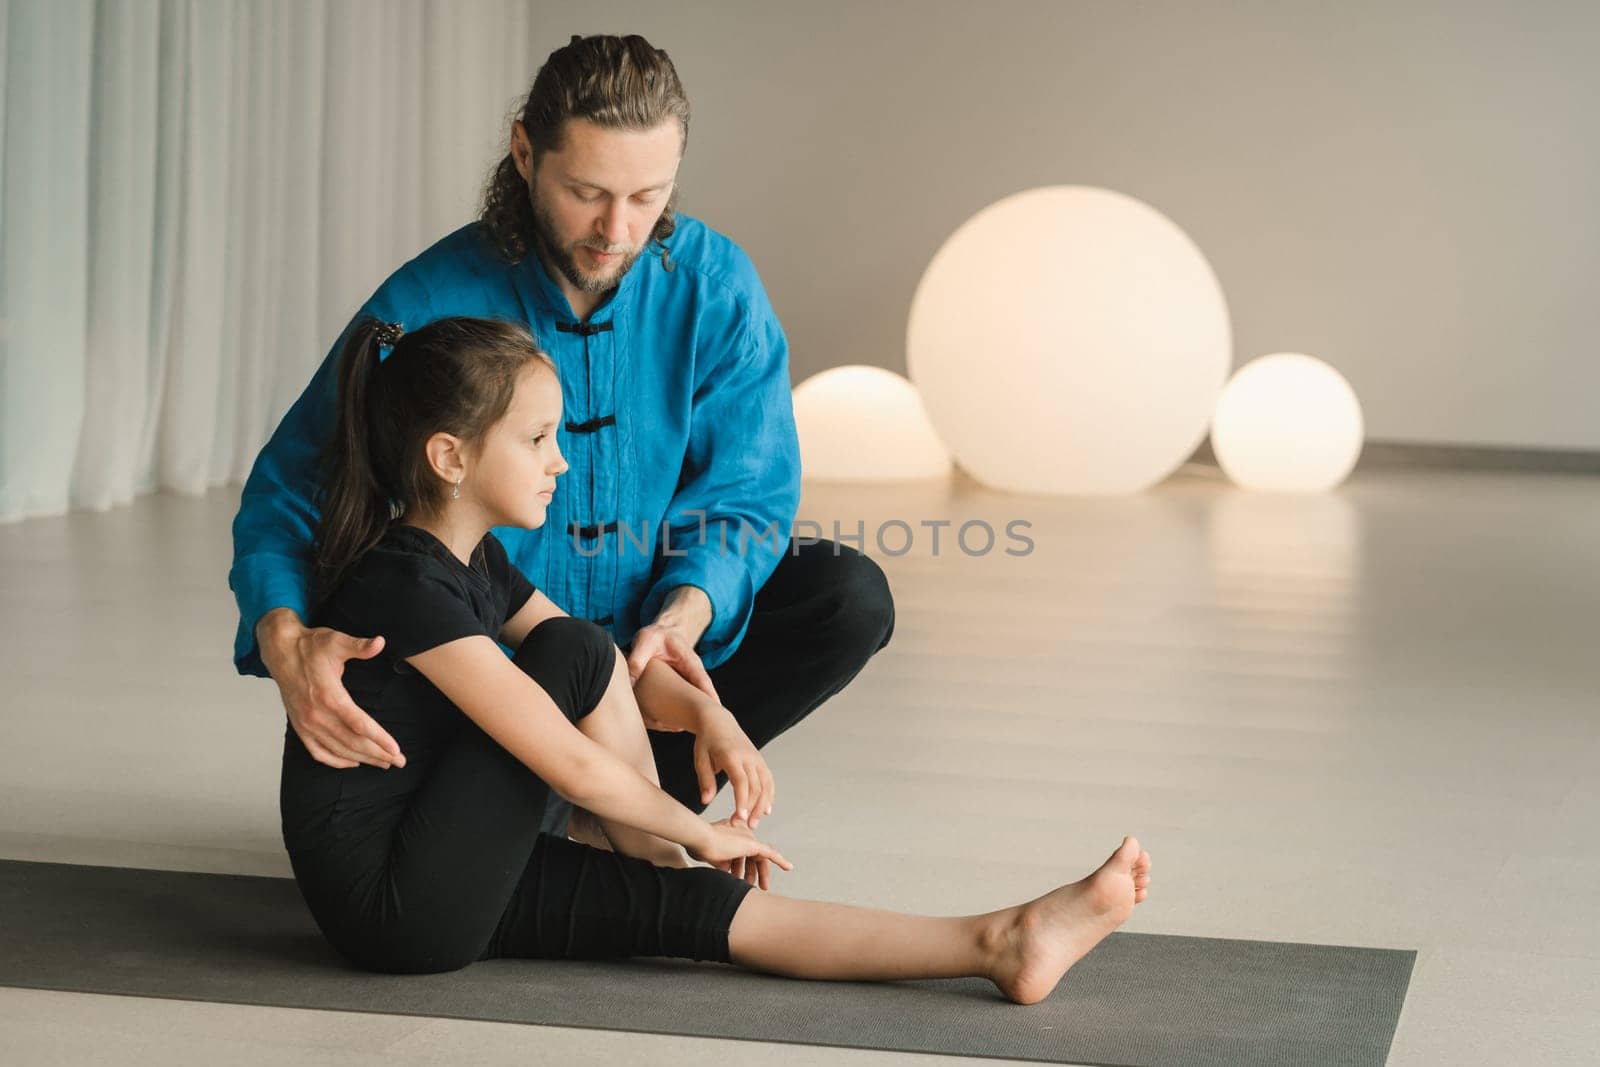 A yoga instructor in training helps a child to do exercises in the gym by Lobachad